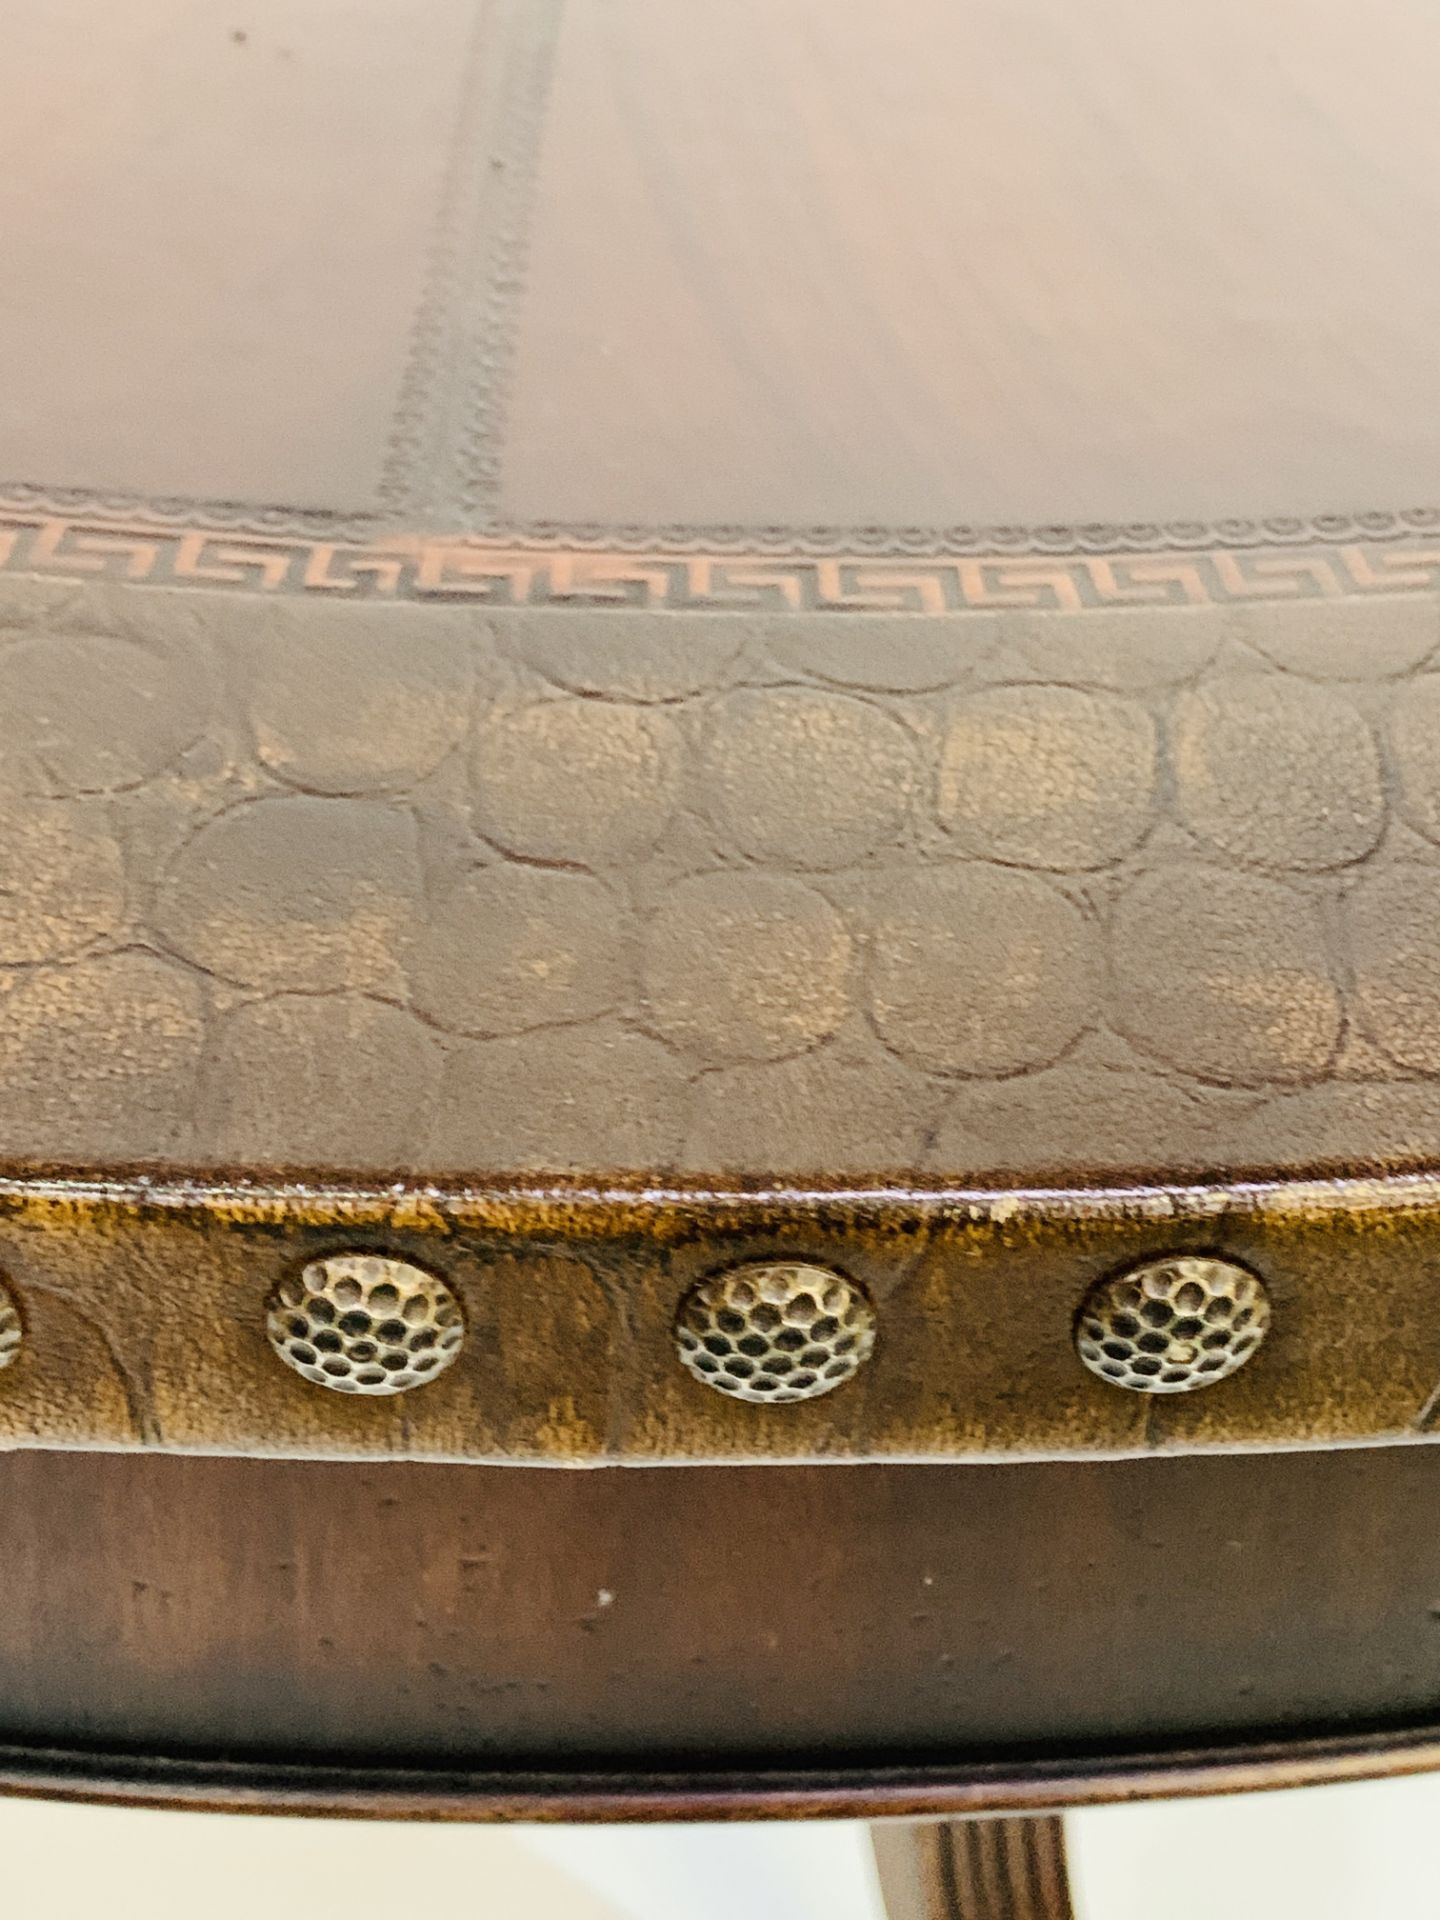 Circular table with tooled leather top - Image 3 of 5